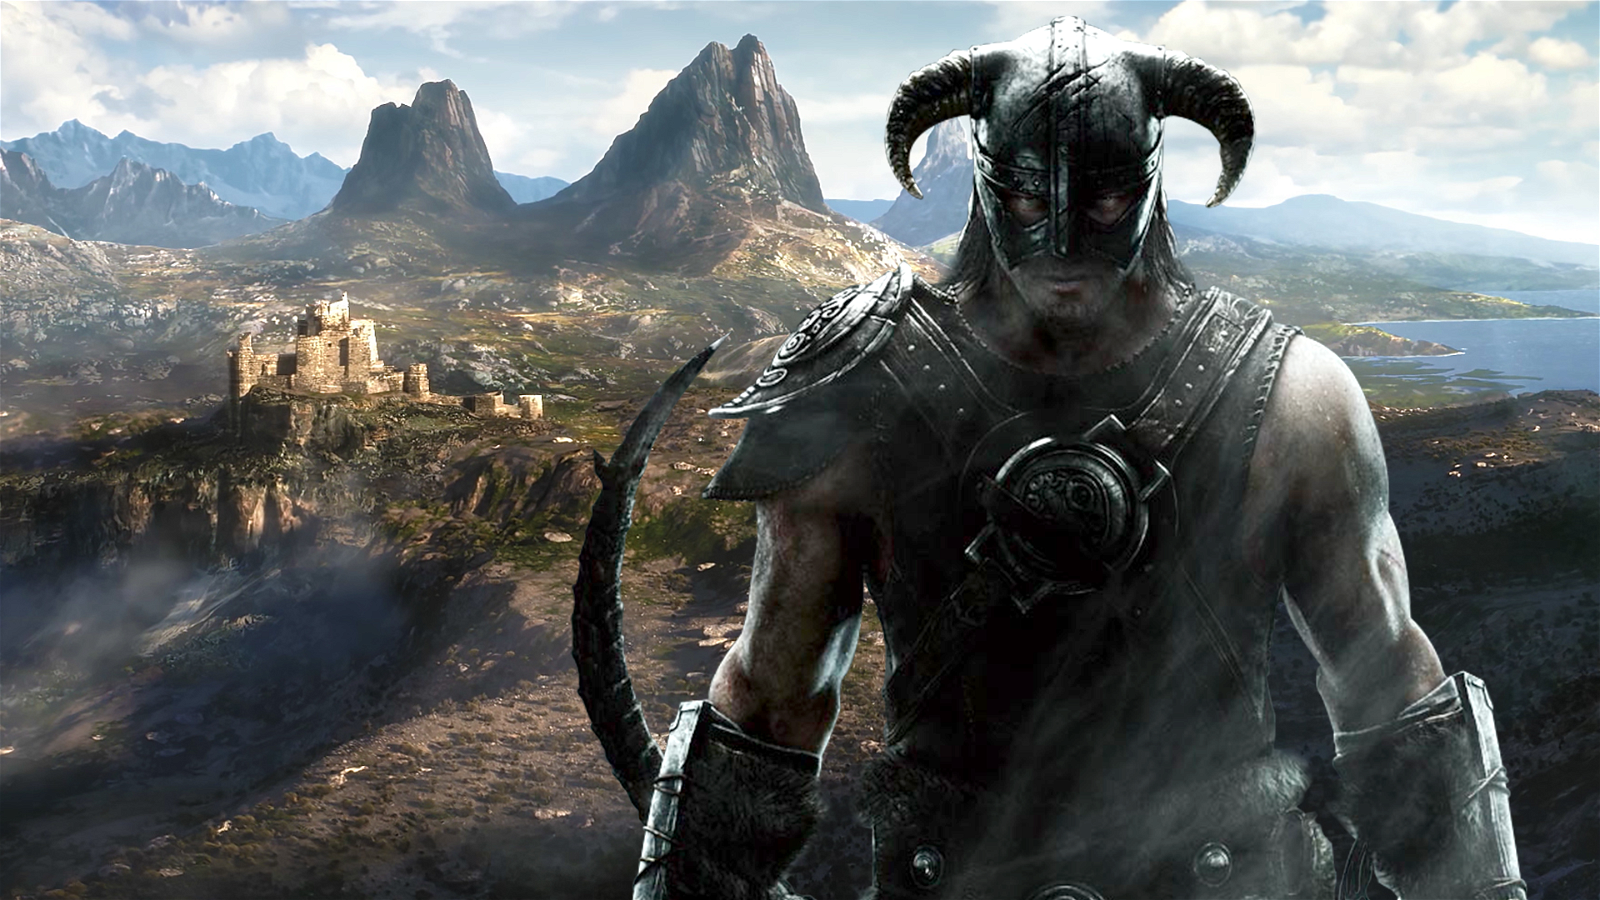 Microsoft's Elder Scrolls 6 exclusivity is a strategic move to boost the Xbox ecosystem and promote Game Pass.